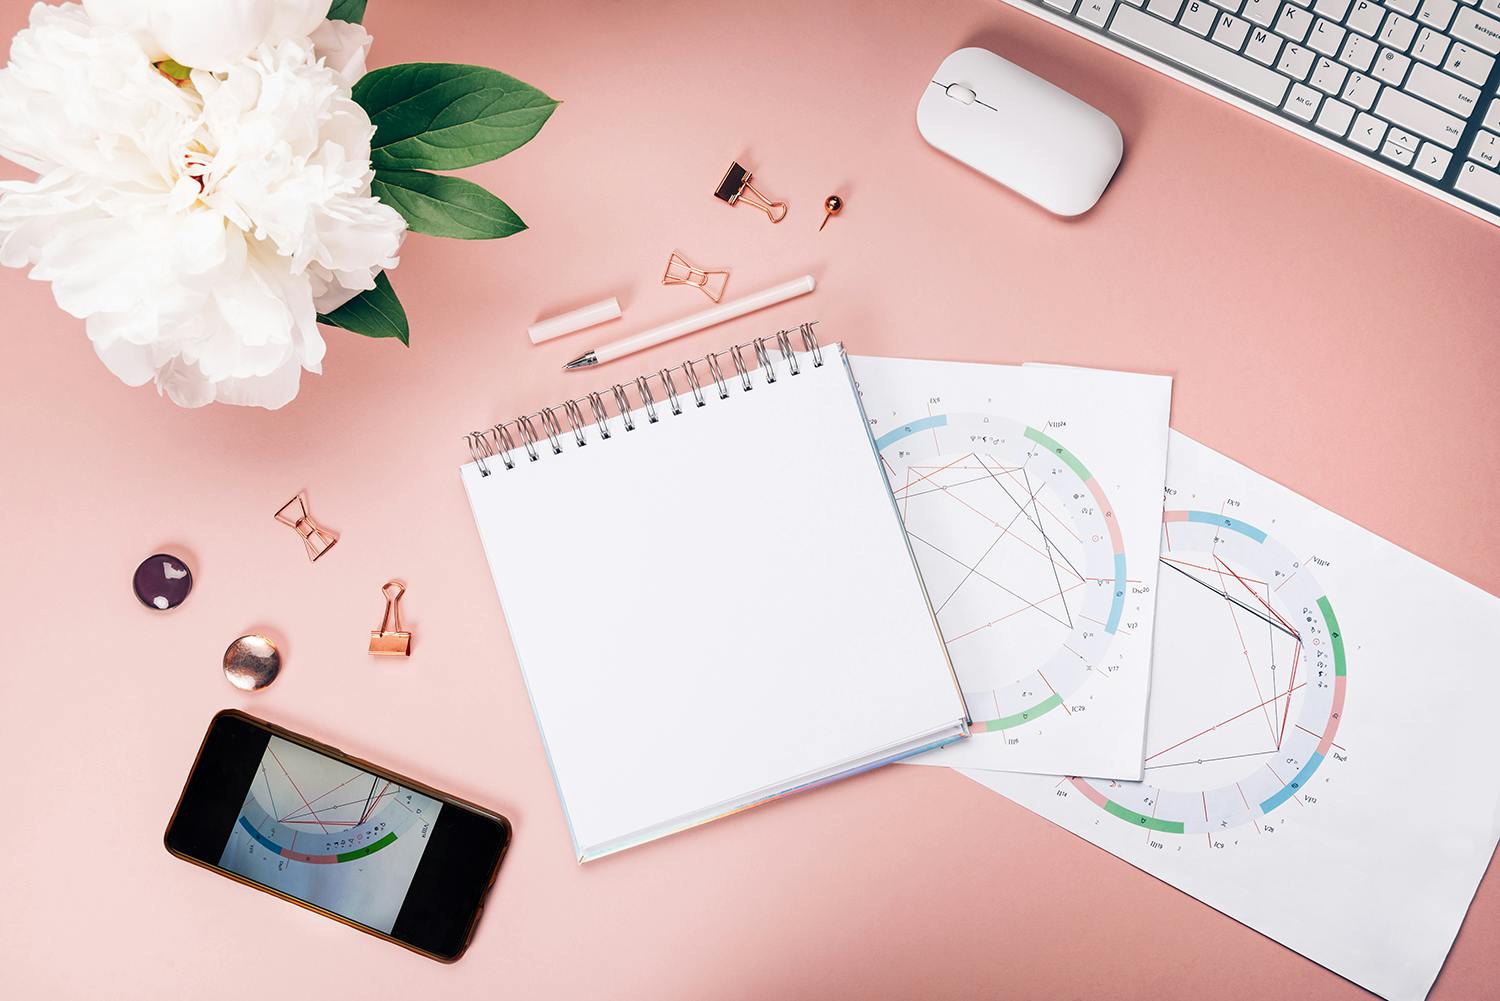 Photo of a cellphone, notebook, hand drawn birth charts, and a computer with a bouquet of flowers next to it on a pink background.